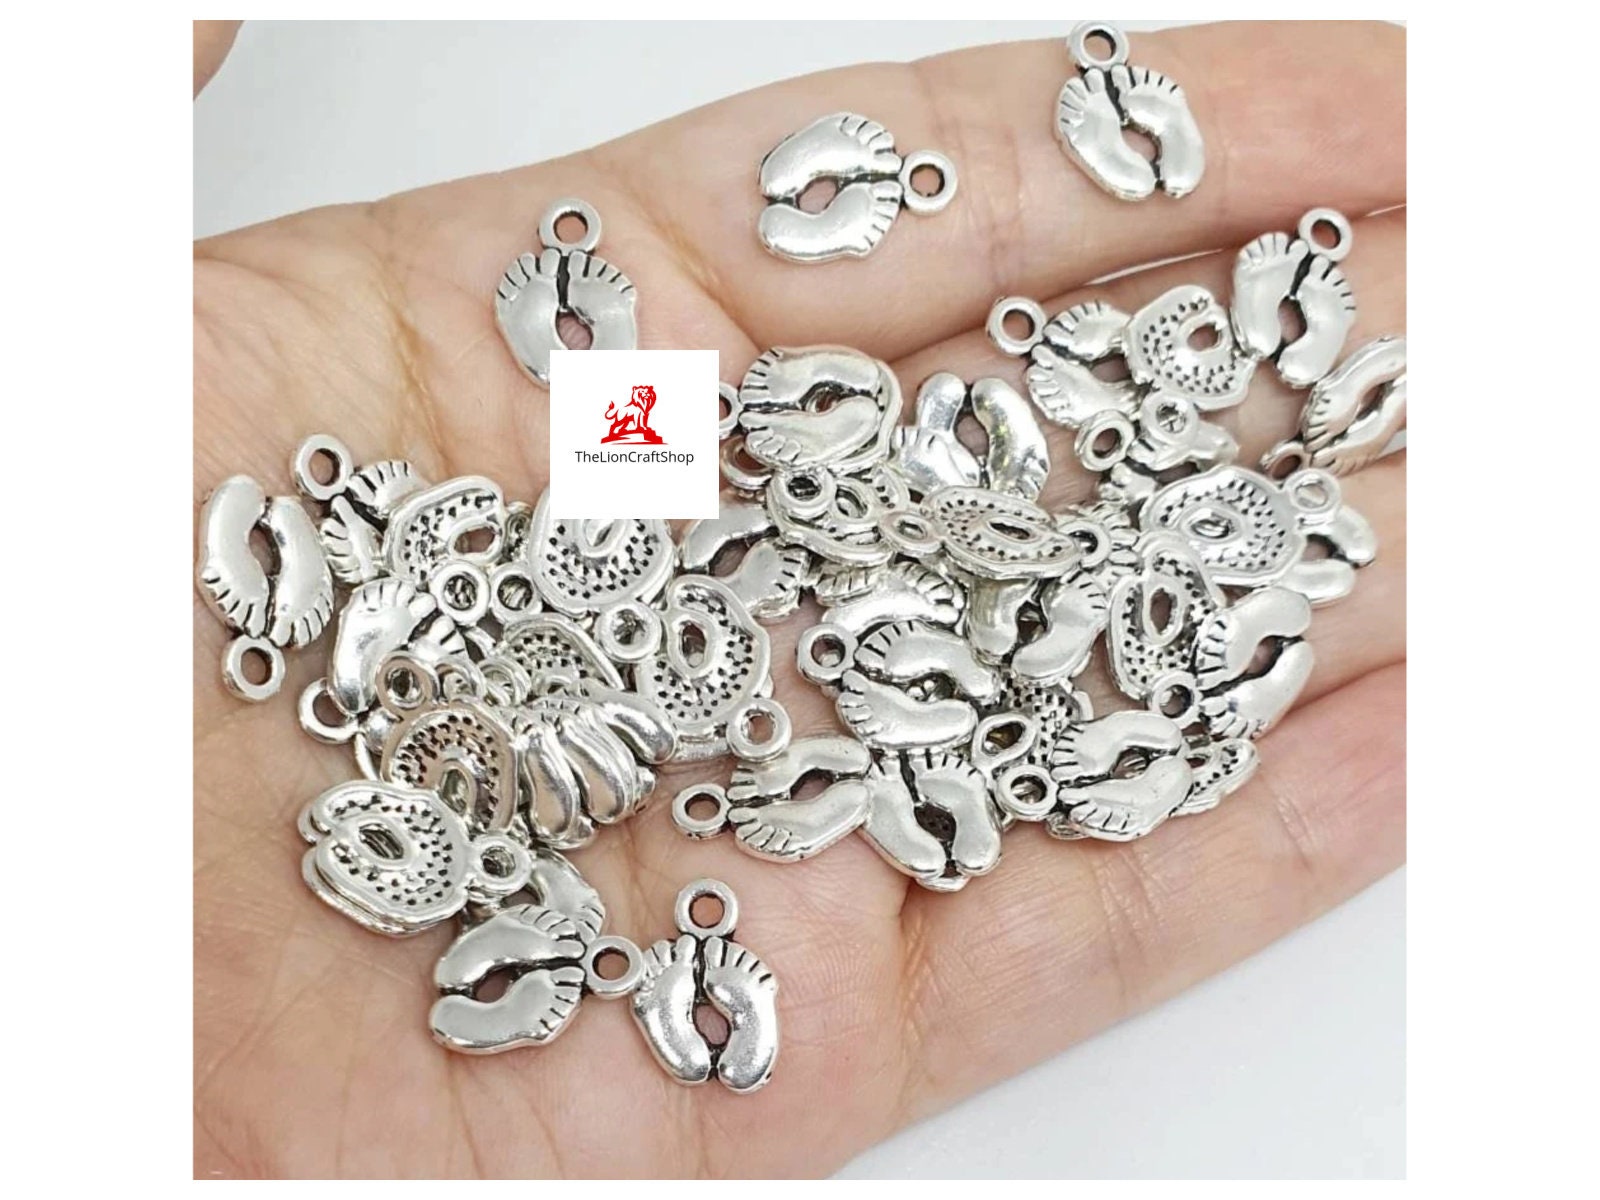 50pcs Baby Feet Charms ,jewelry Making Charms for Bracelets 